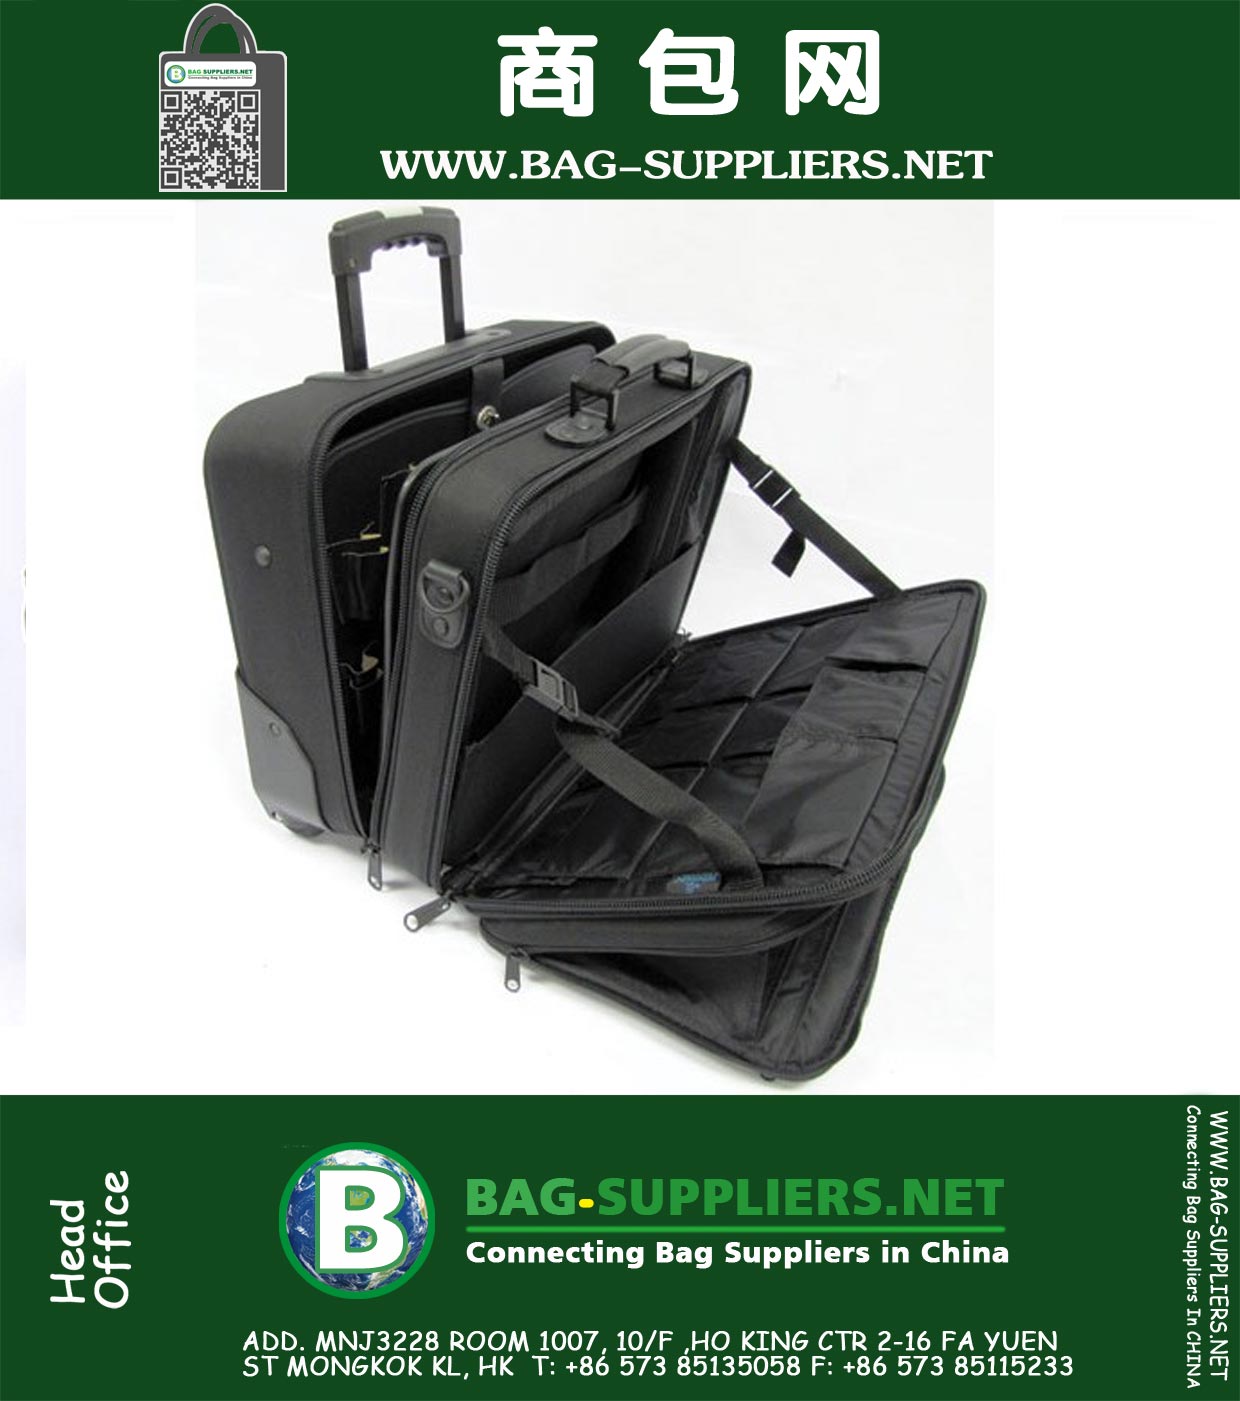 Tools Soft-Sided Tote Case and Pallets